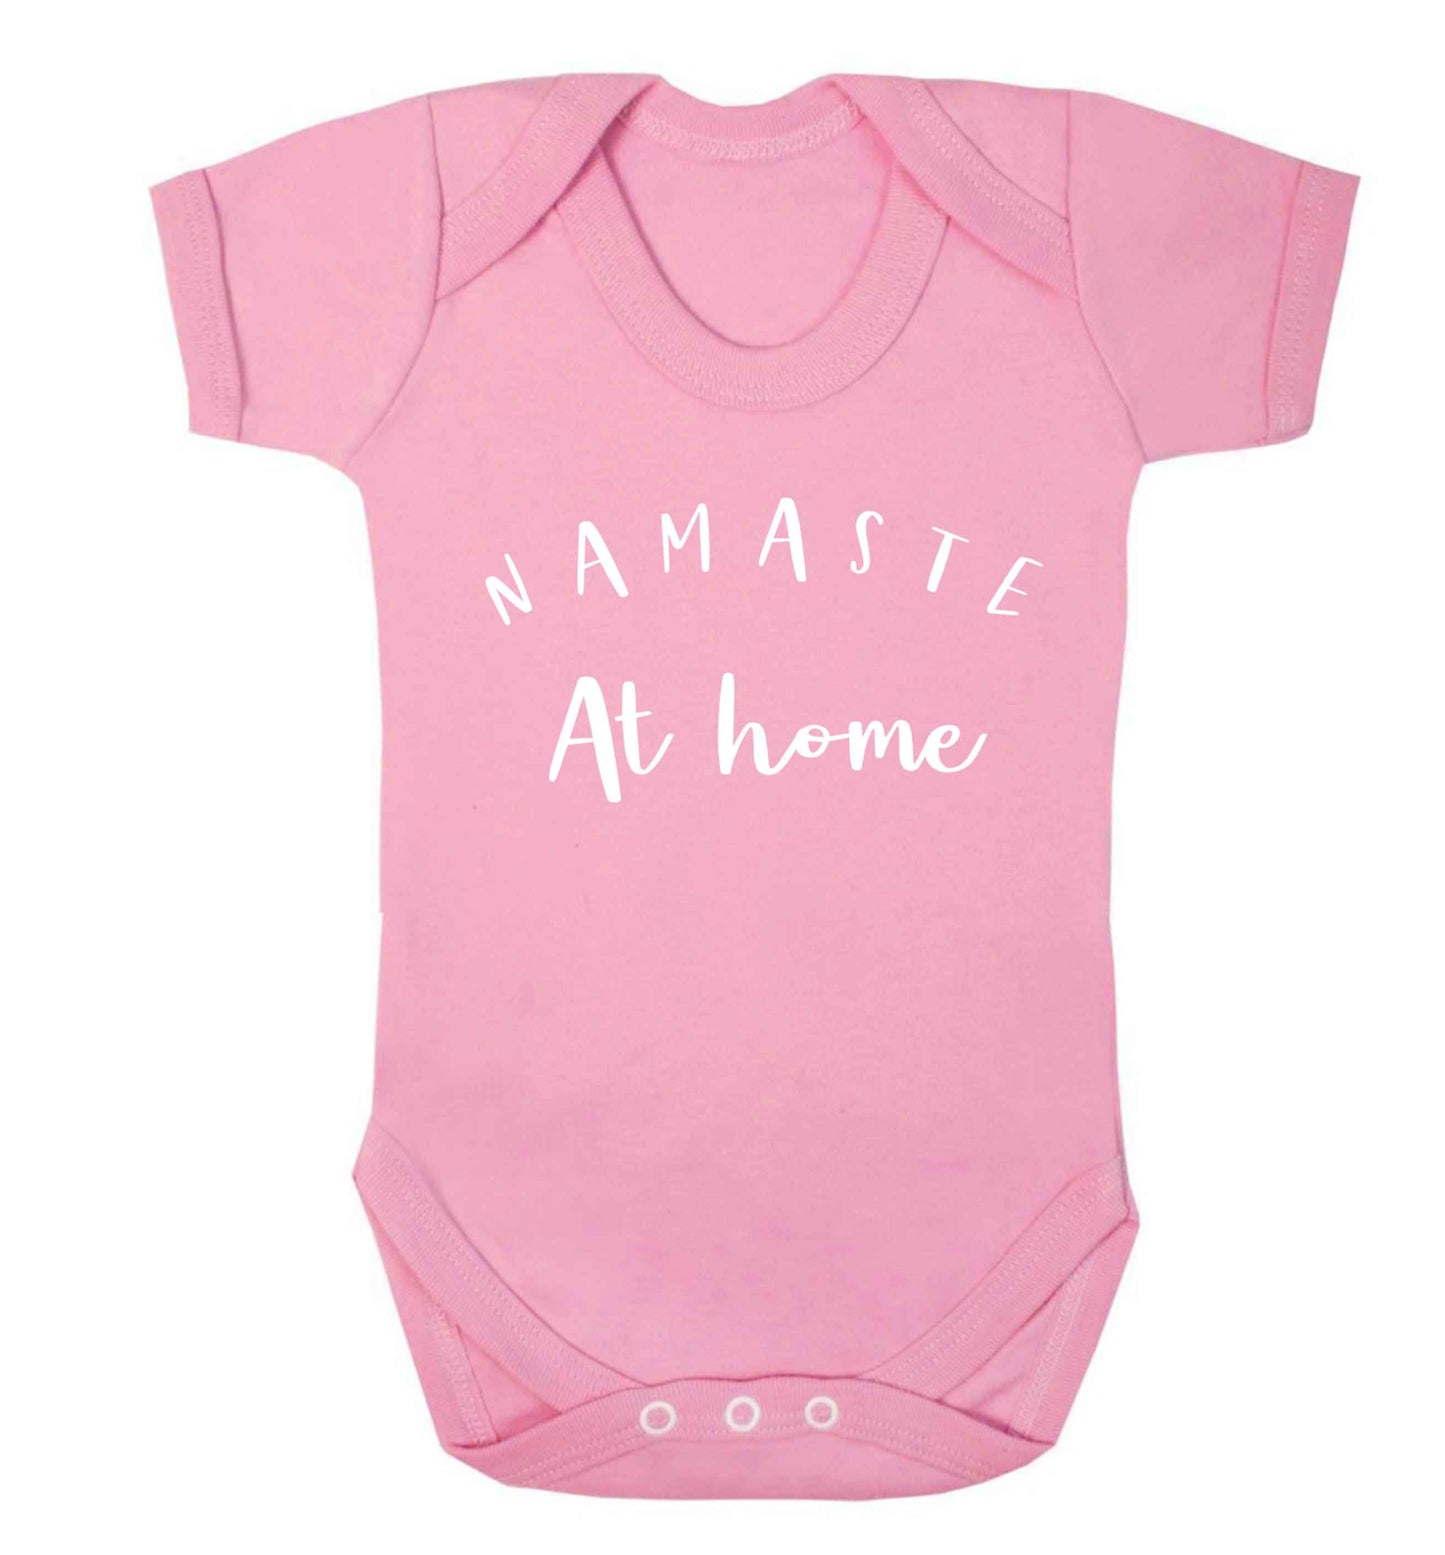 Namaste at home Baby Vest pale pink 18-24 months